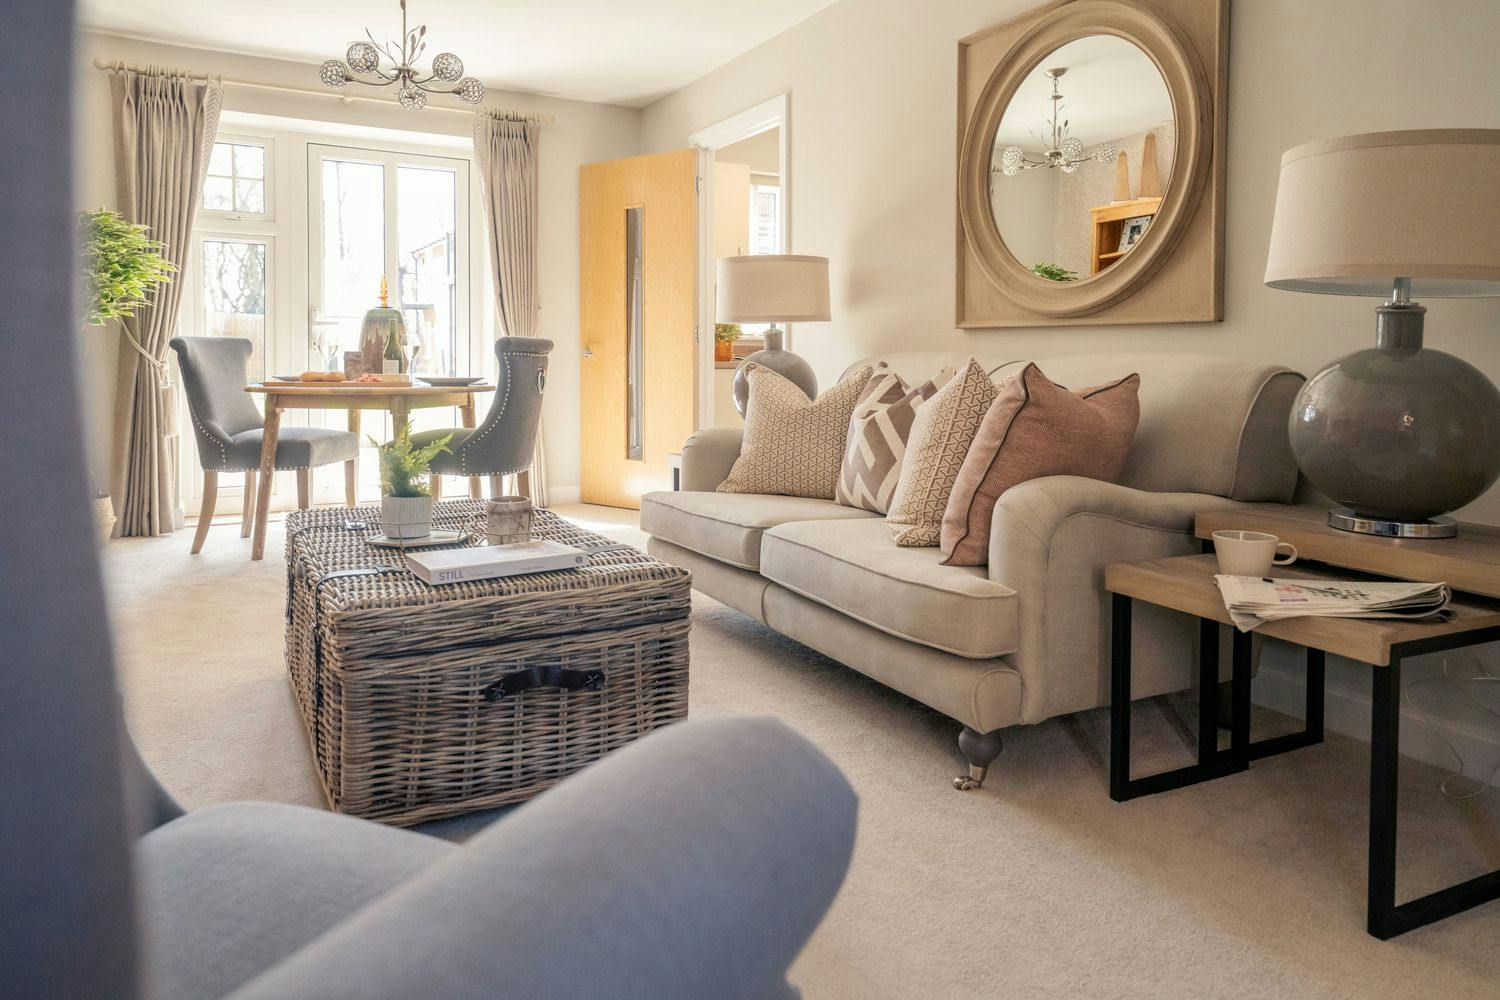 Living Room at Browning Court Retirement Development in Newcastle-upon-Tyne, Tyne and Wear